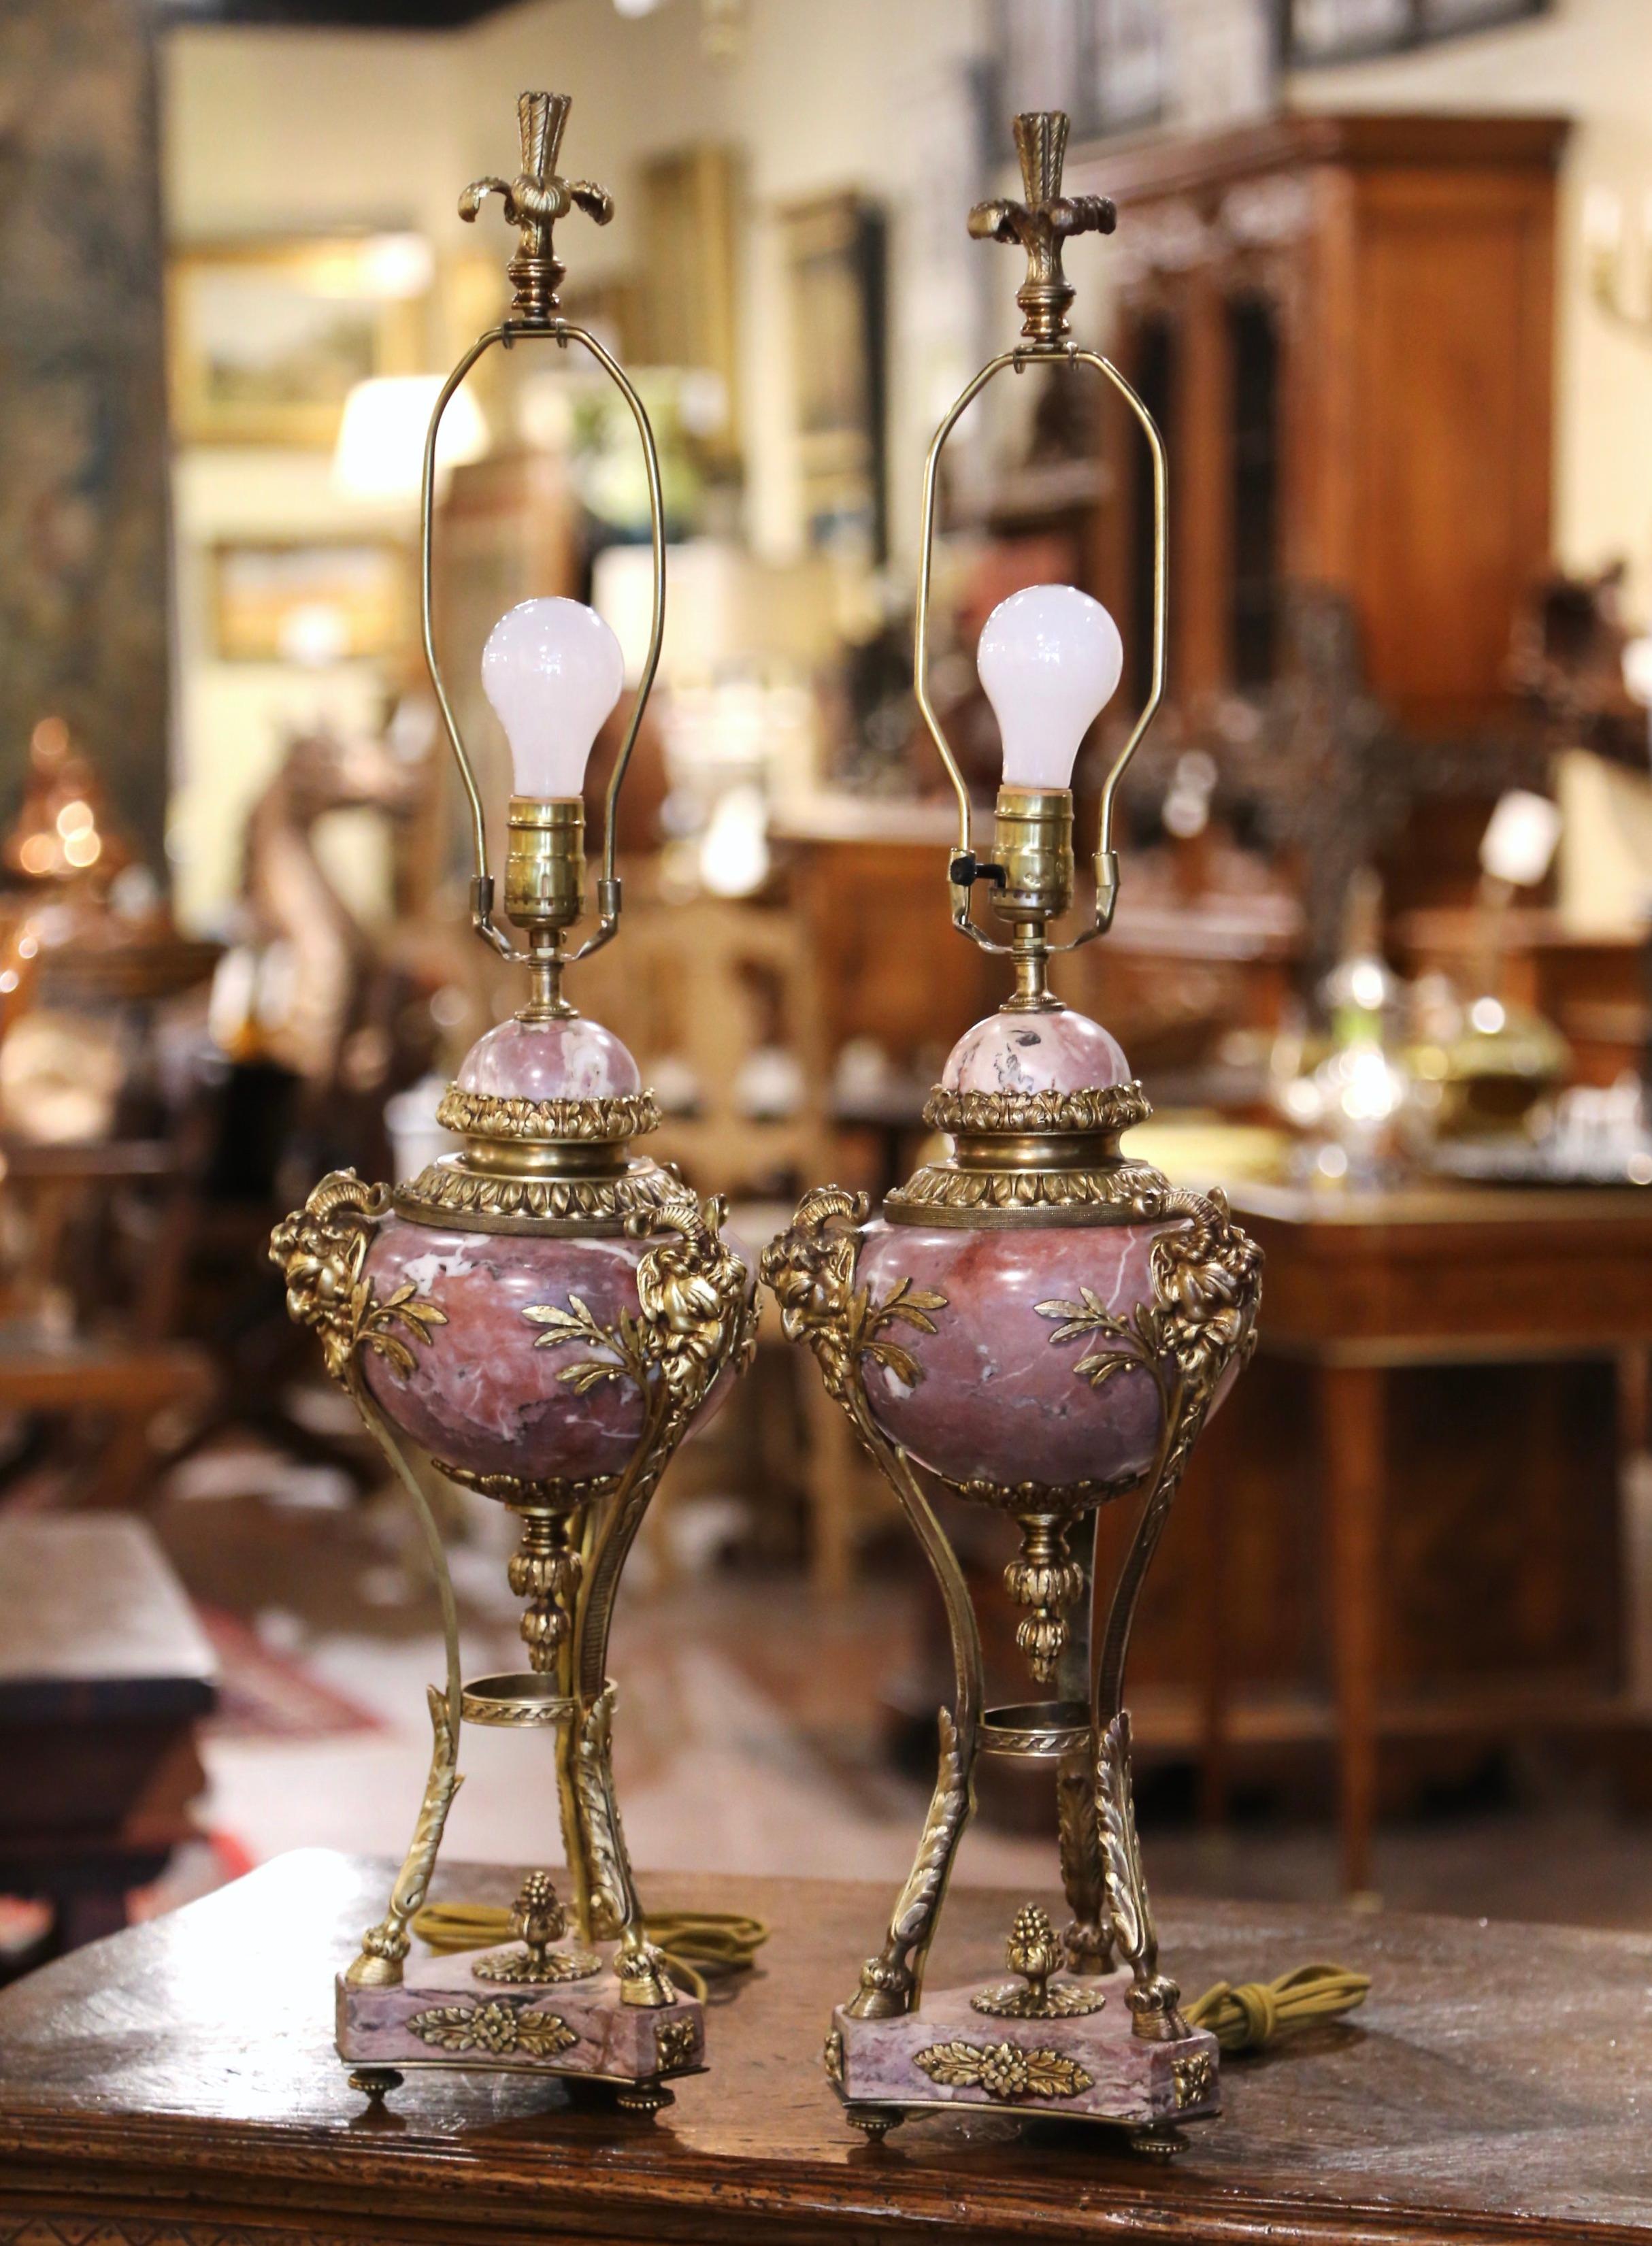 Crafted in France, circa 1870 and made of marble and bronze, these antique urns converted into table lamps stand on a three-leg bronze base ending with hoof feet, over a marble bottom and small round feet. Decorated with bronze dore gilt leaf